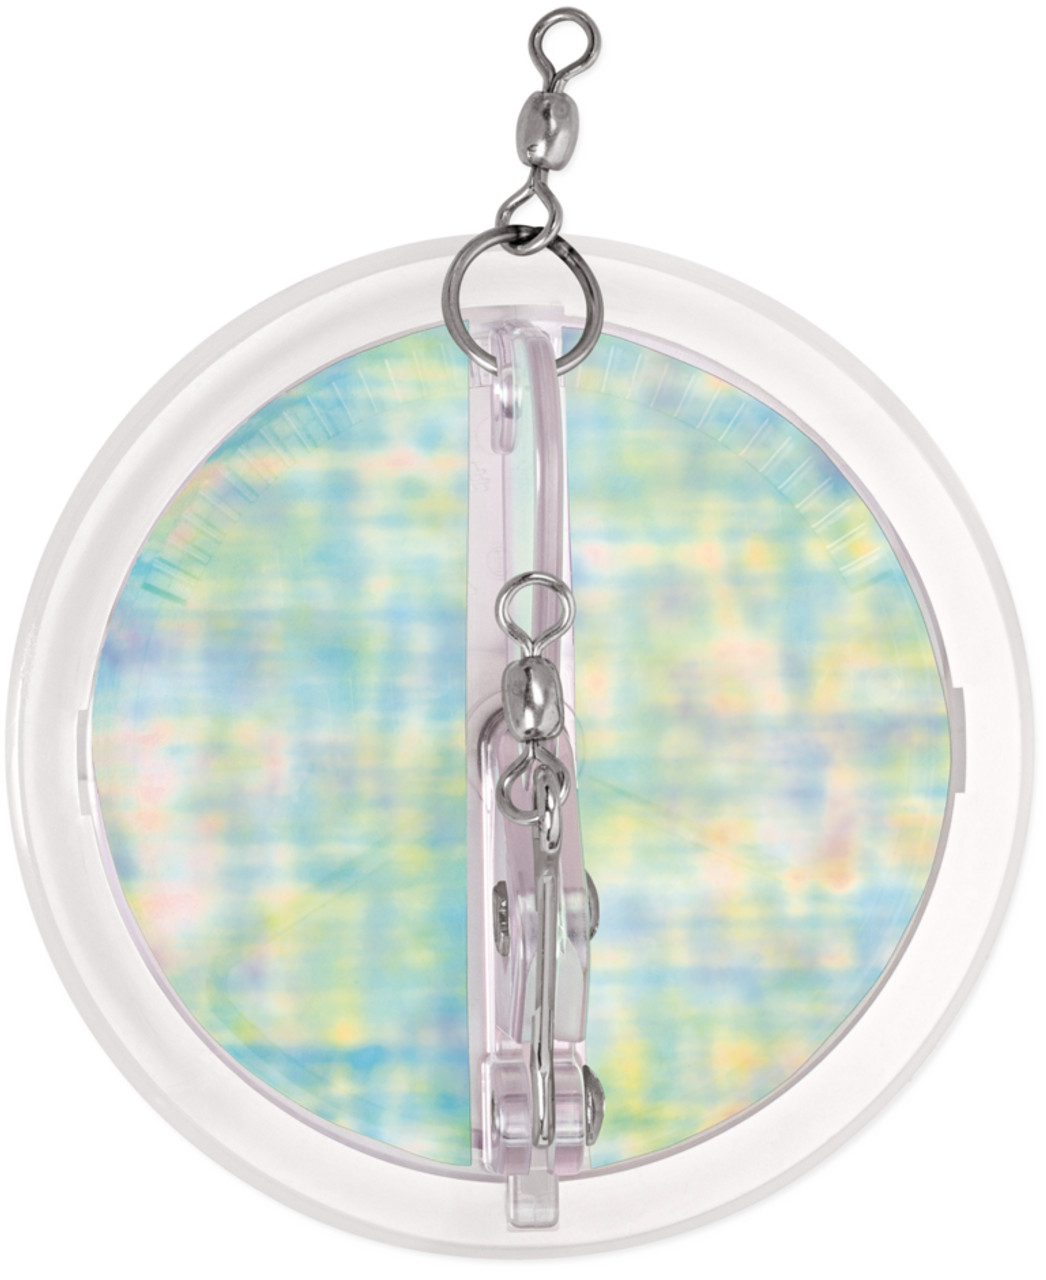 Luhr Jensen Dipsy Diver - Clear / Clear Bottom UV Moonjelly - 4 7/8 